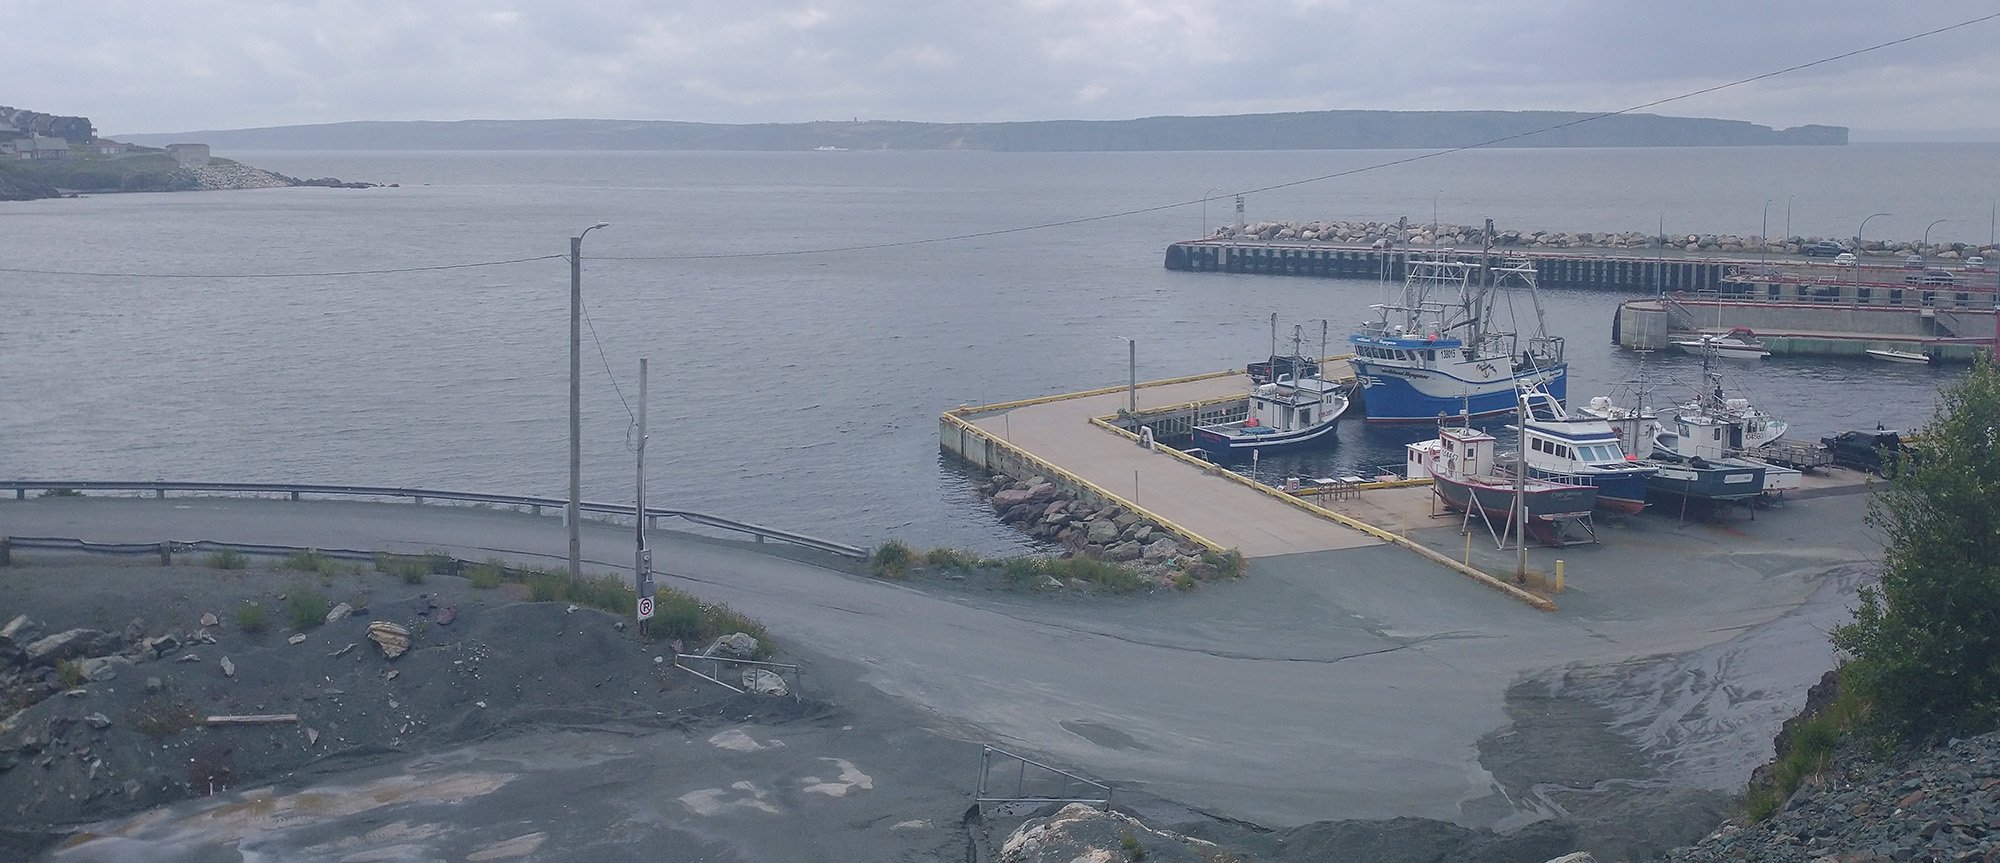 In the distance there is Bell Island. You need to take the ferry to it but it seems to have a few things going on. Next time, next time.